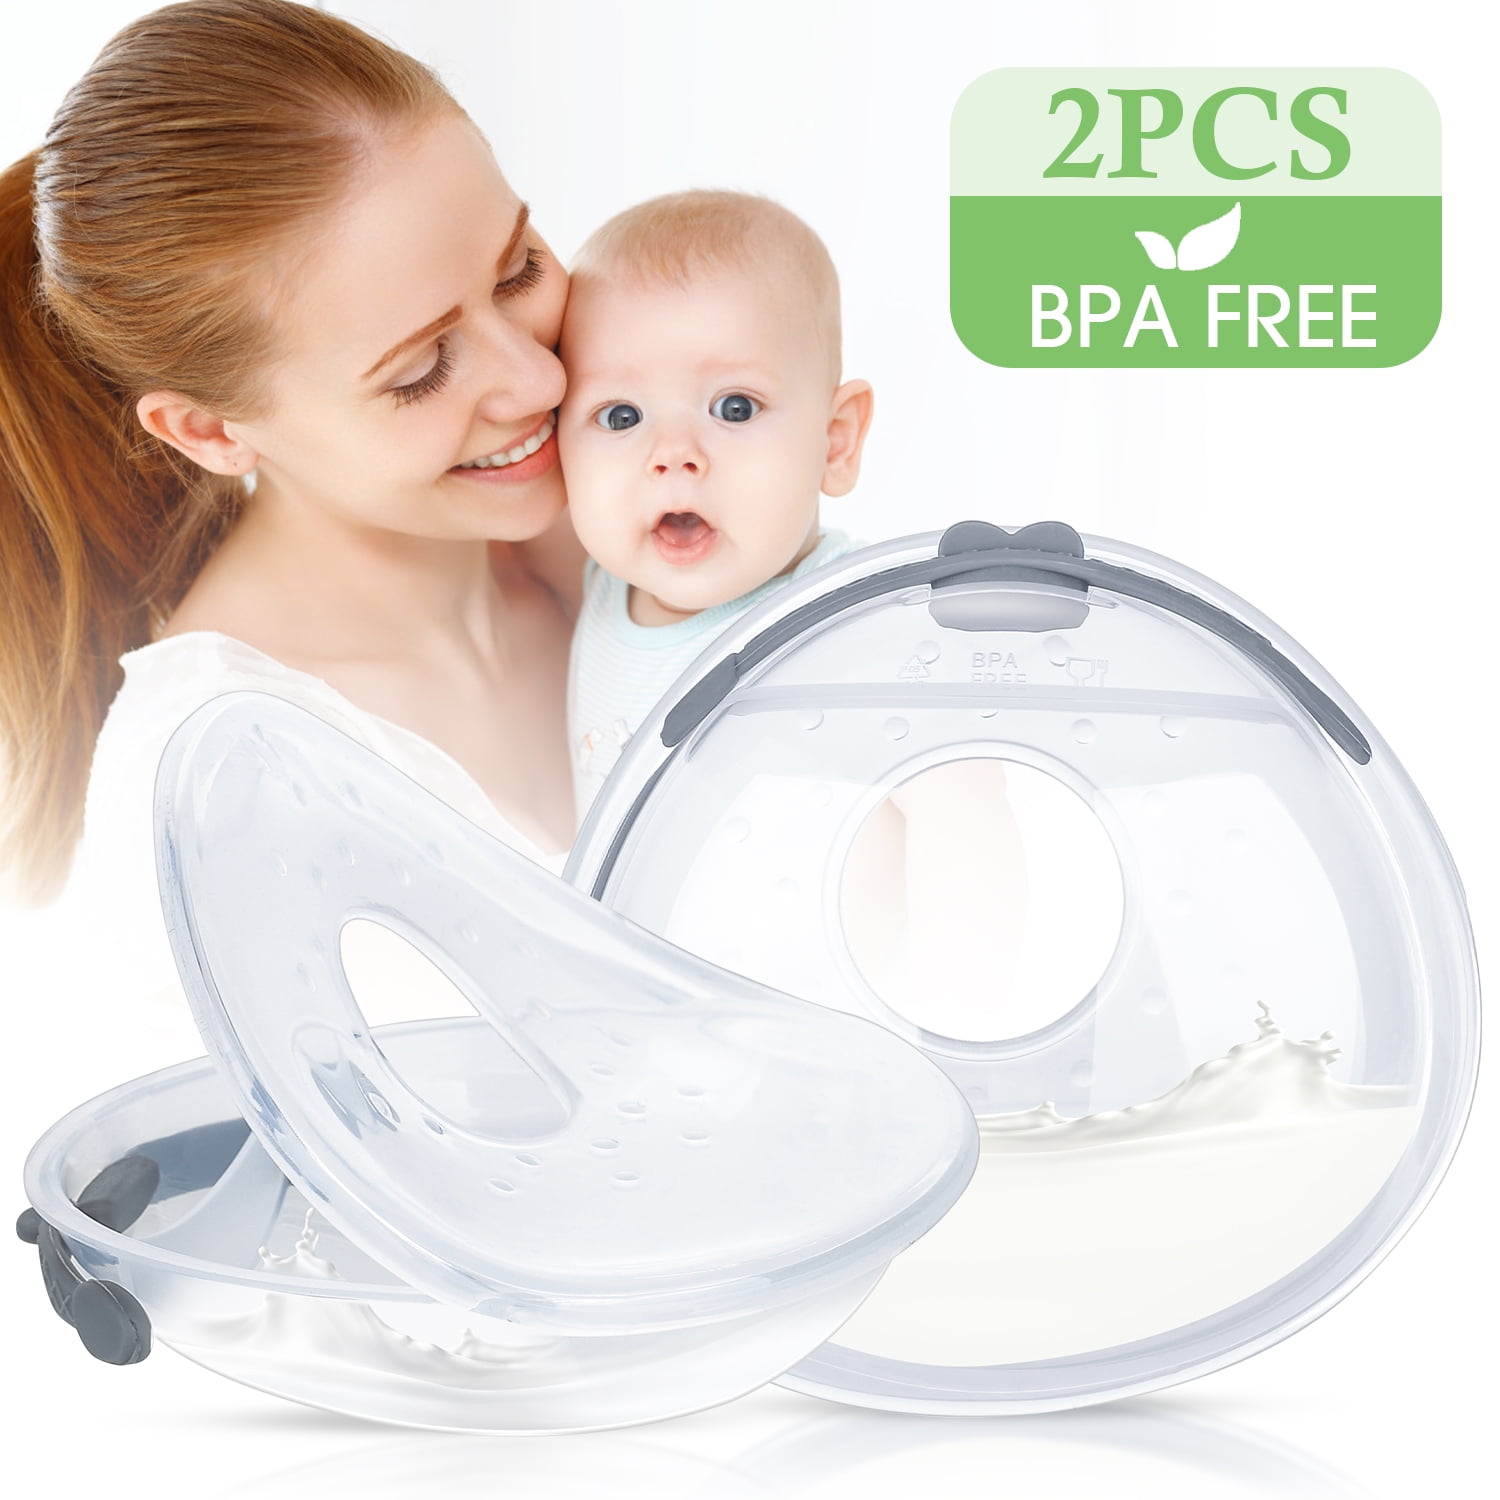 Milk Collector For Breastmilk Wearable Breastmilk Collector Catcher  Discreet For Bra Wearable Soft Silicone Breast Milk Savers